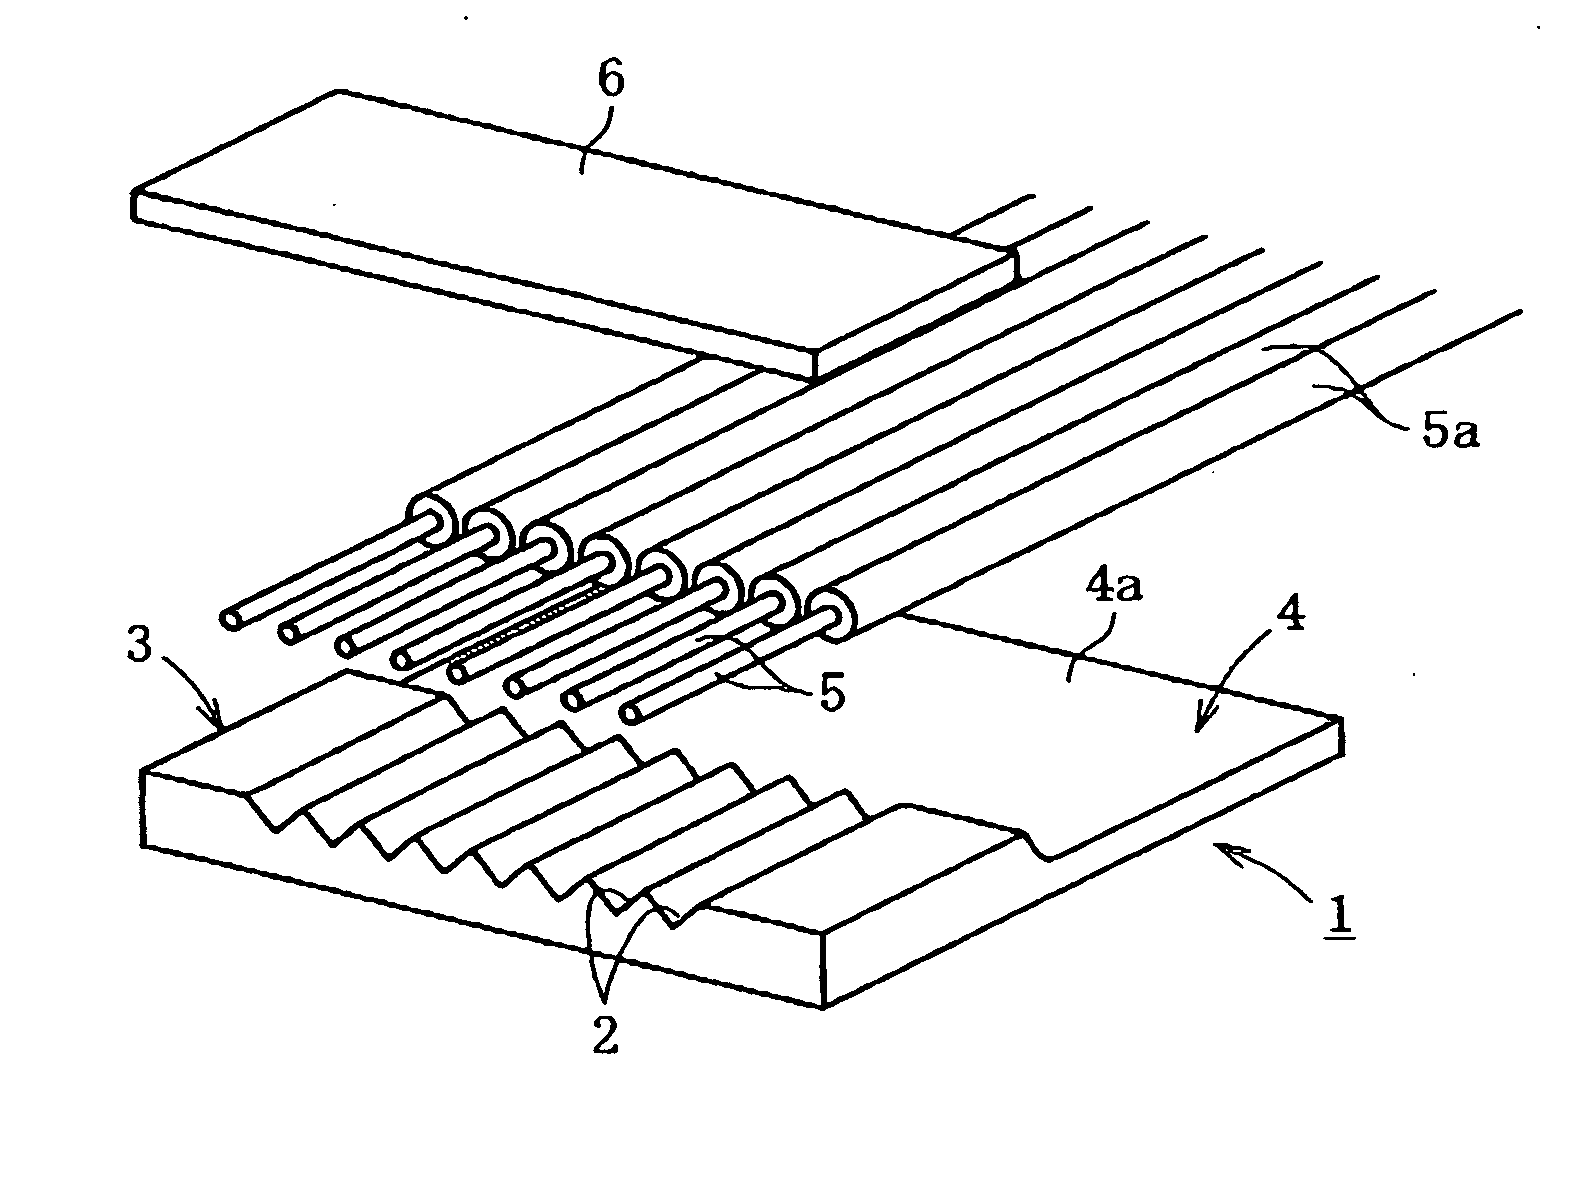 Substrate for optical fiber array and method for fabricating the same